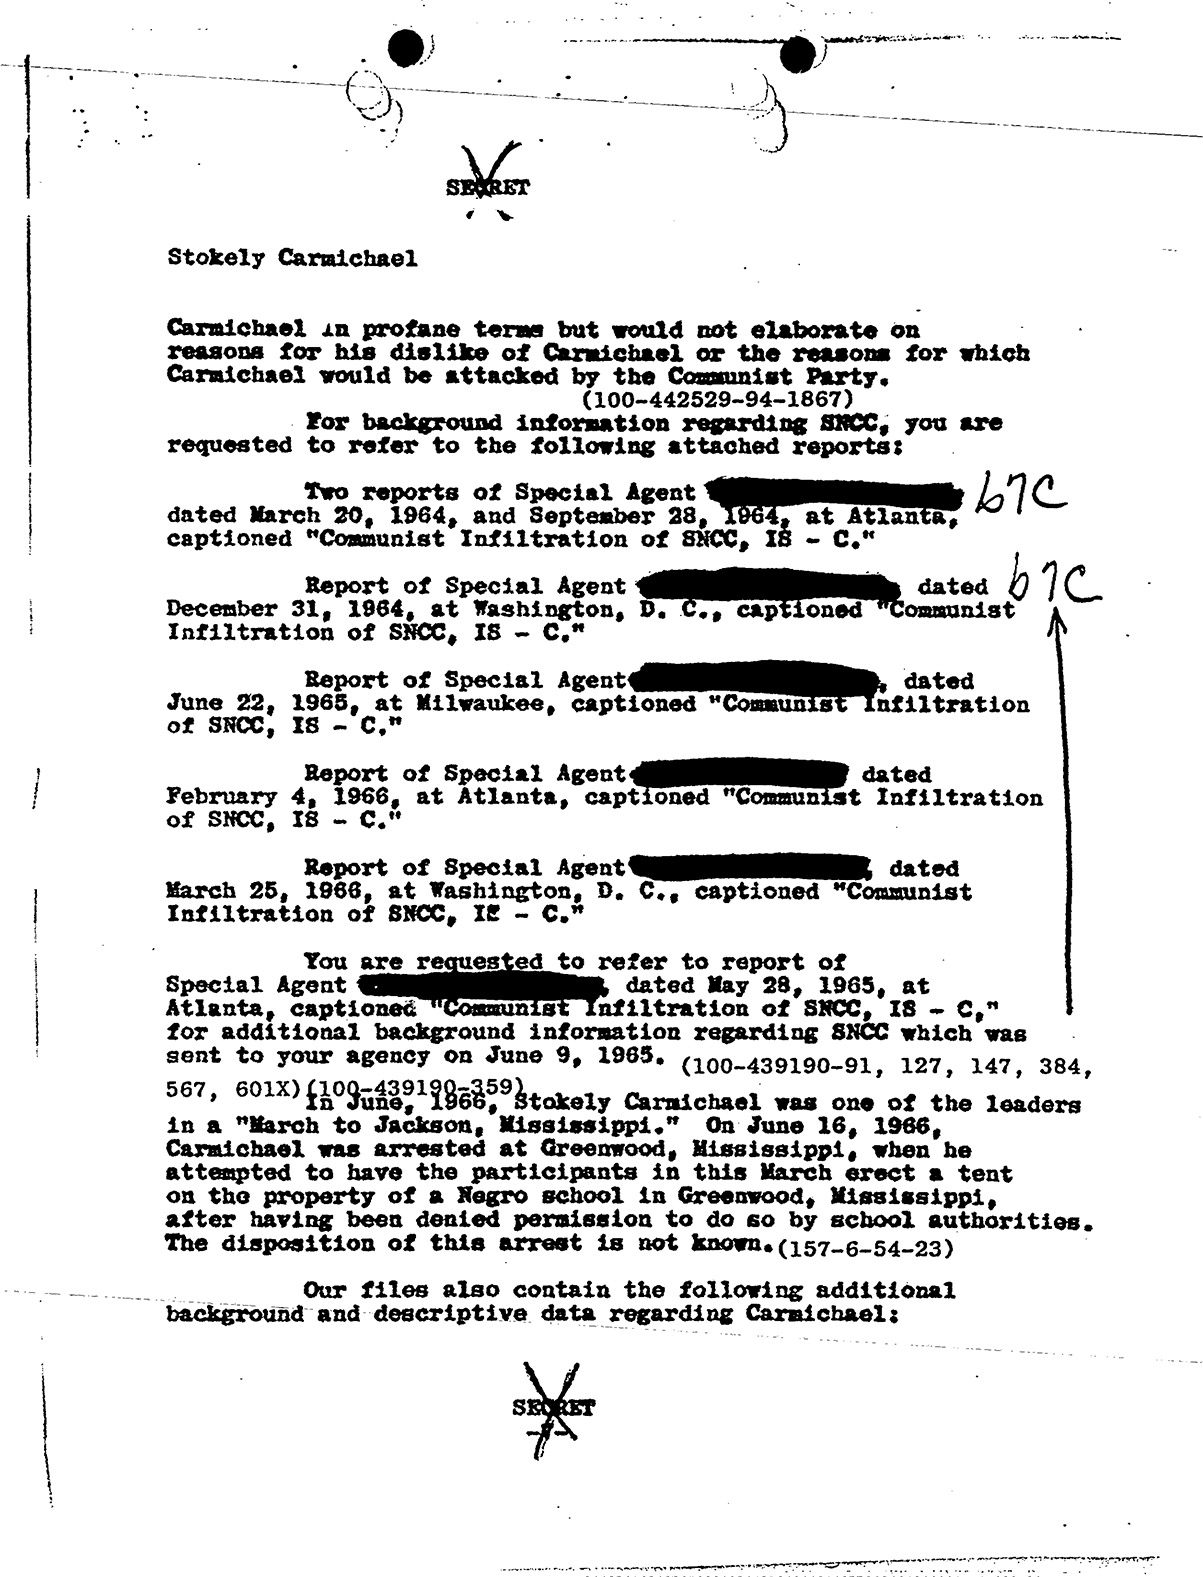 Page from FBI file on Carmichael